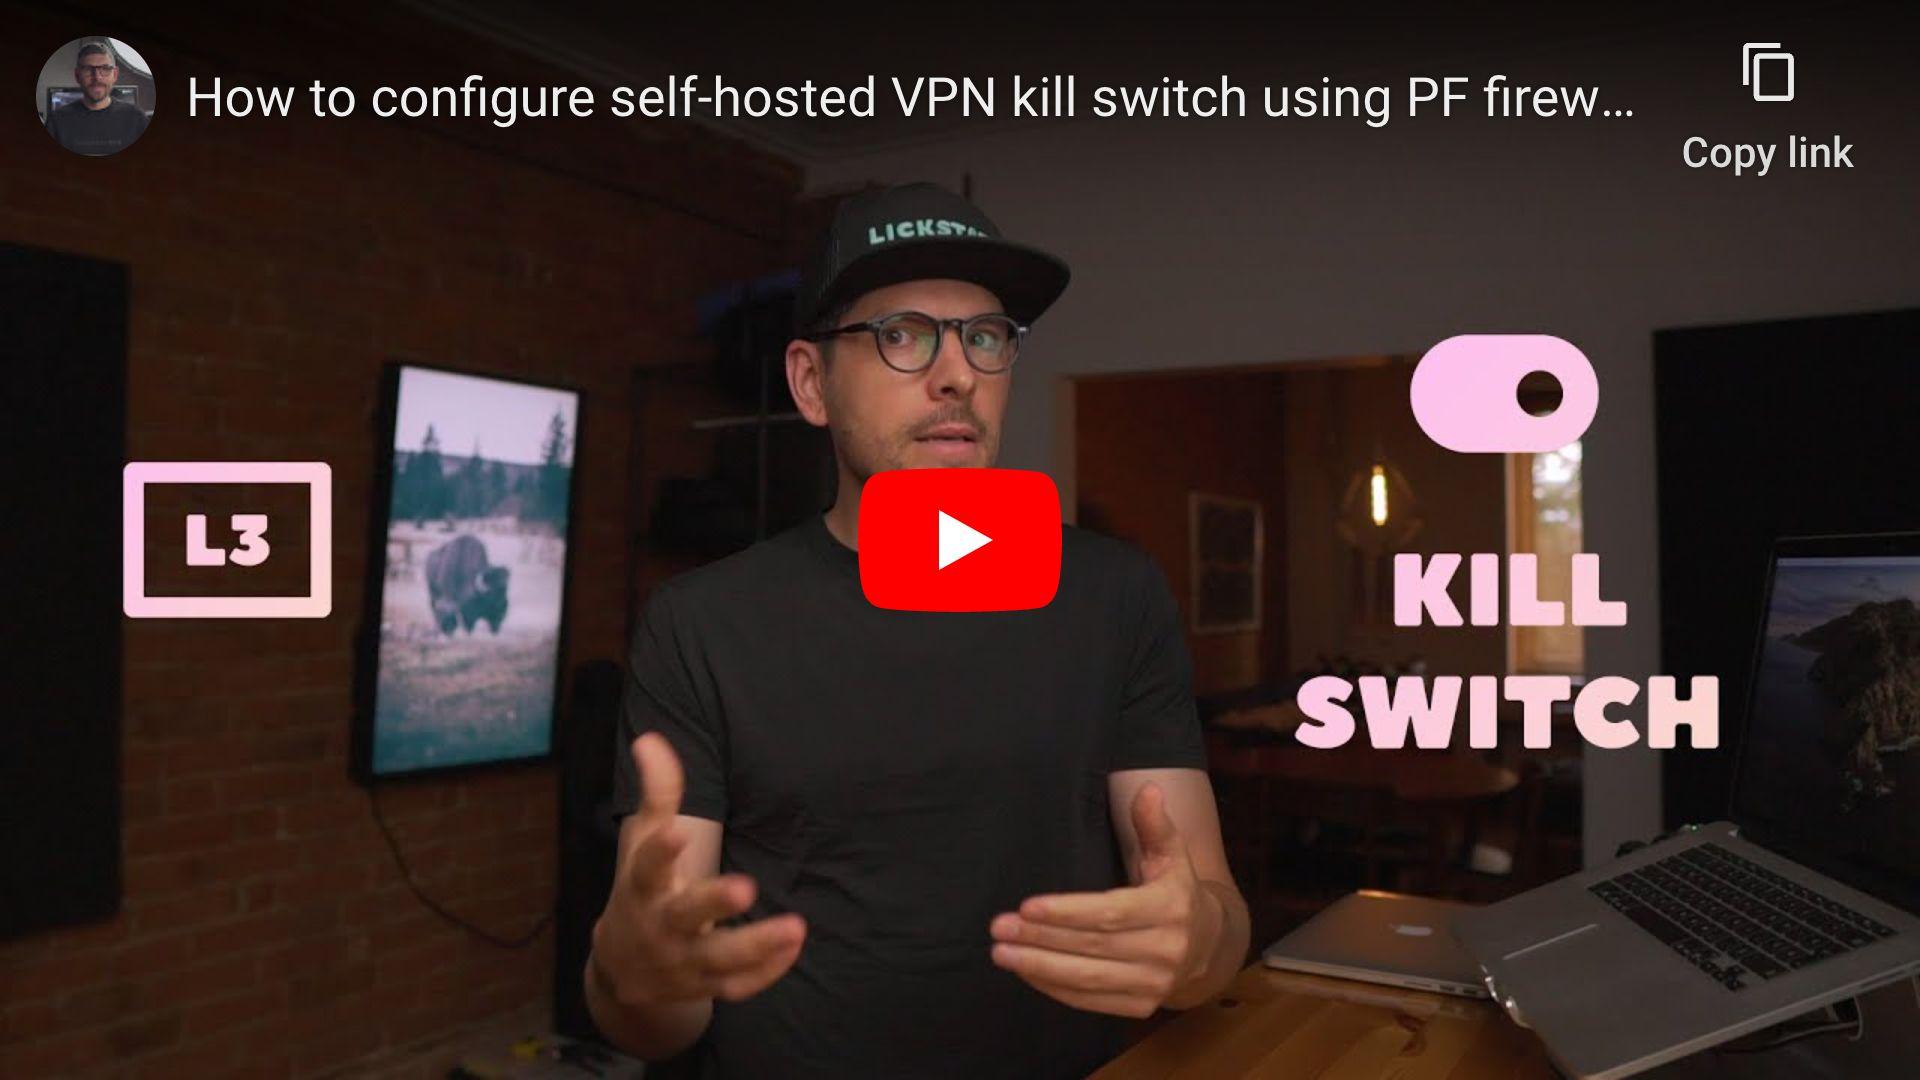 How to configure self-hosted VPN kill switch using PF firewall on macOS